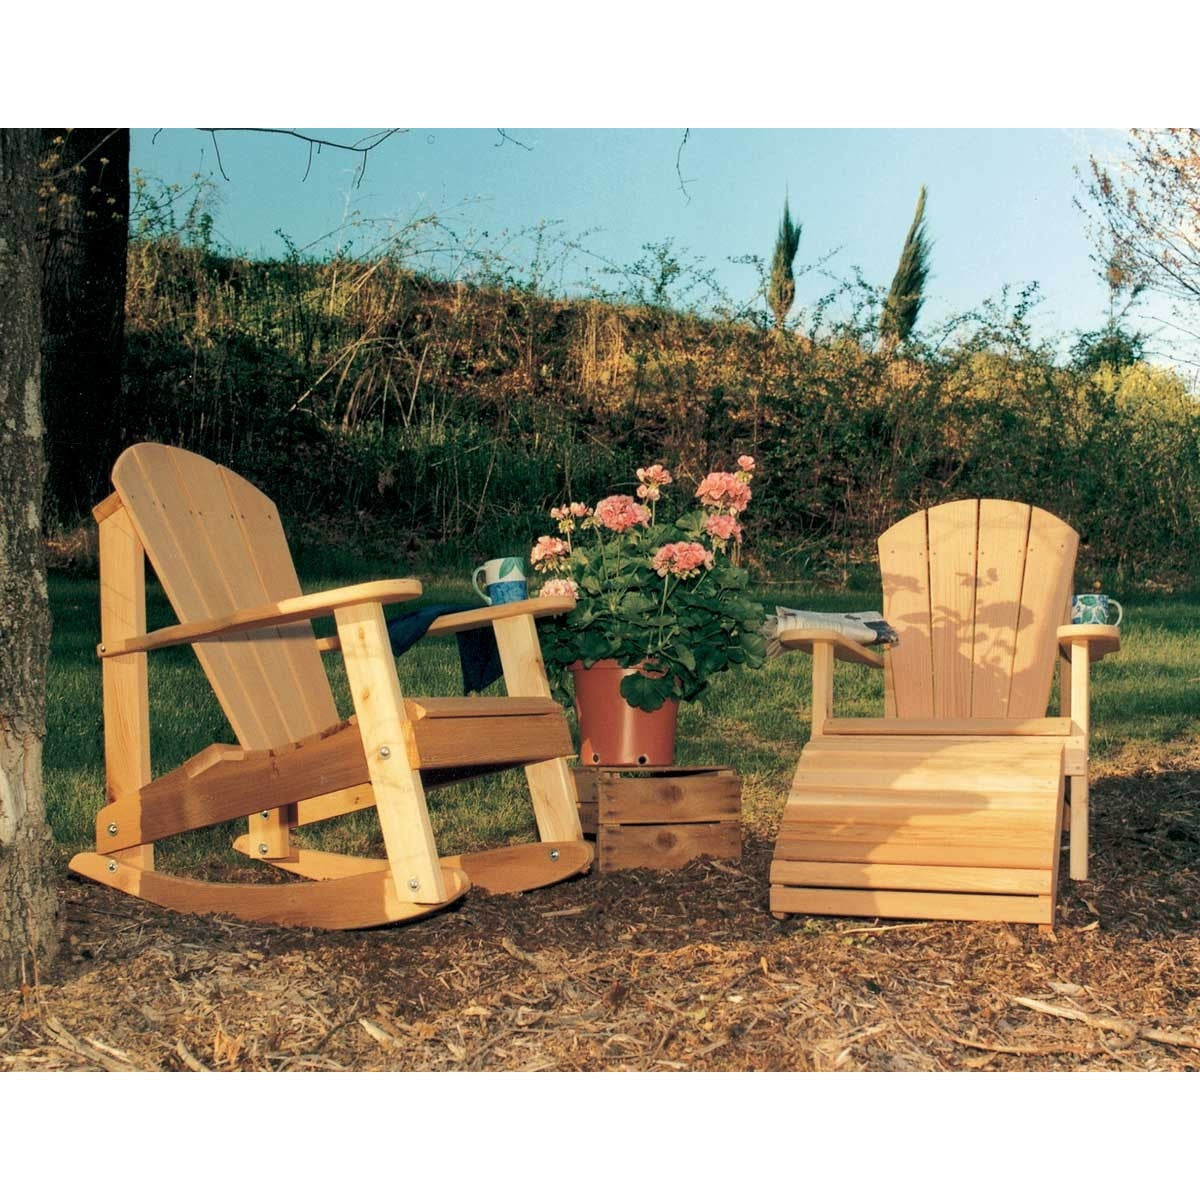 Outdoor Chairs